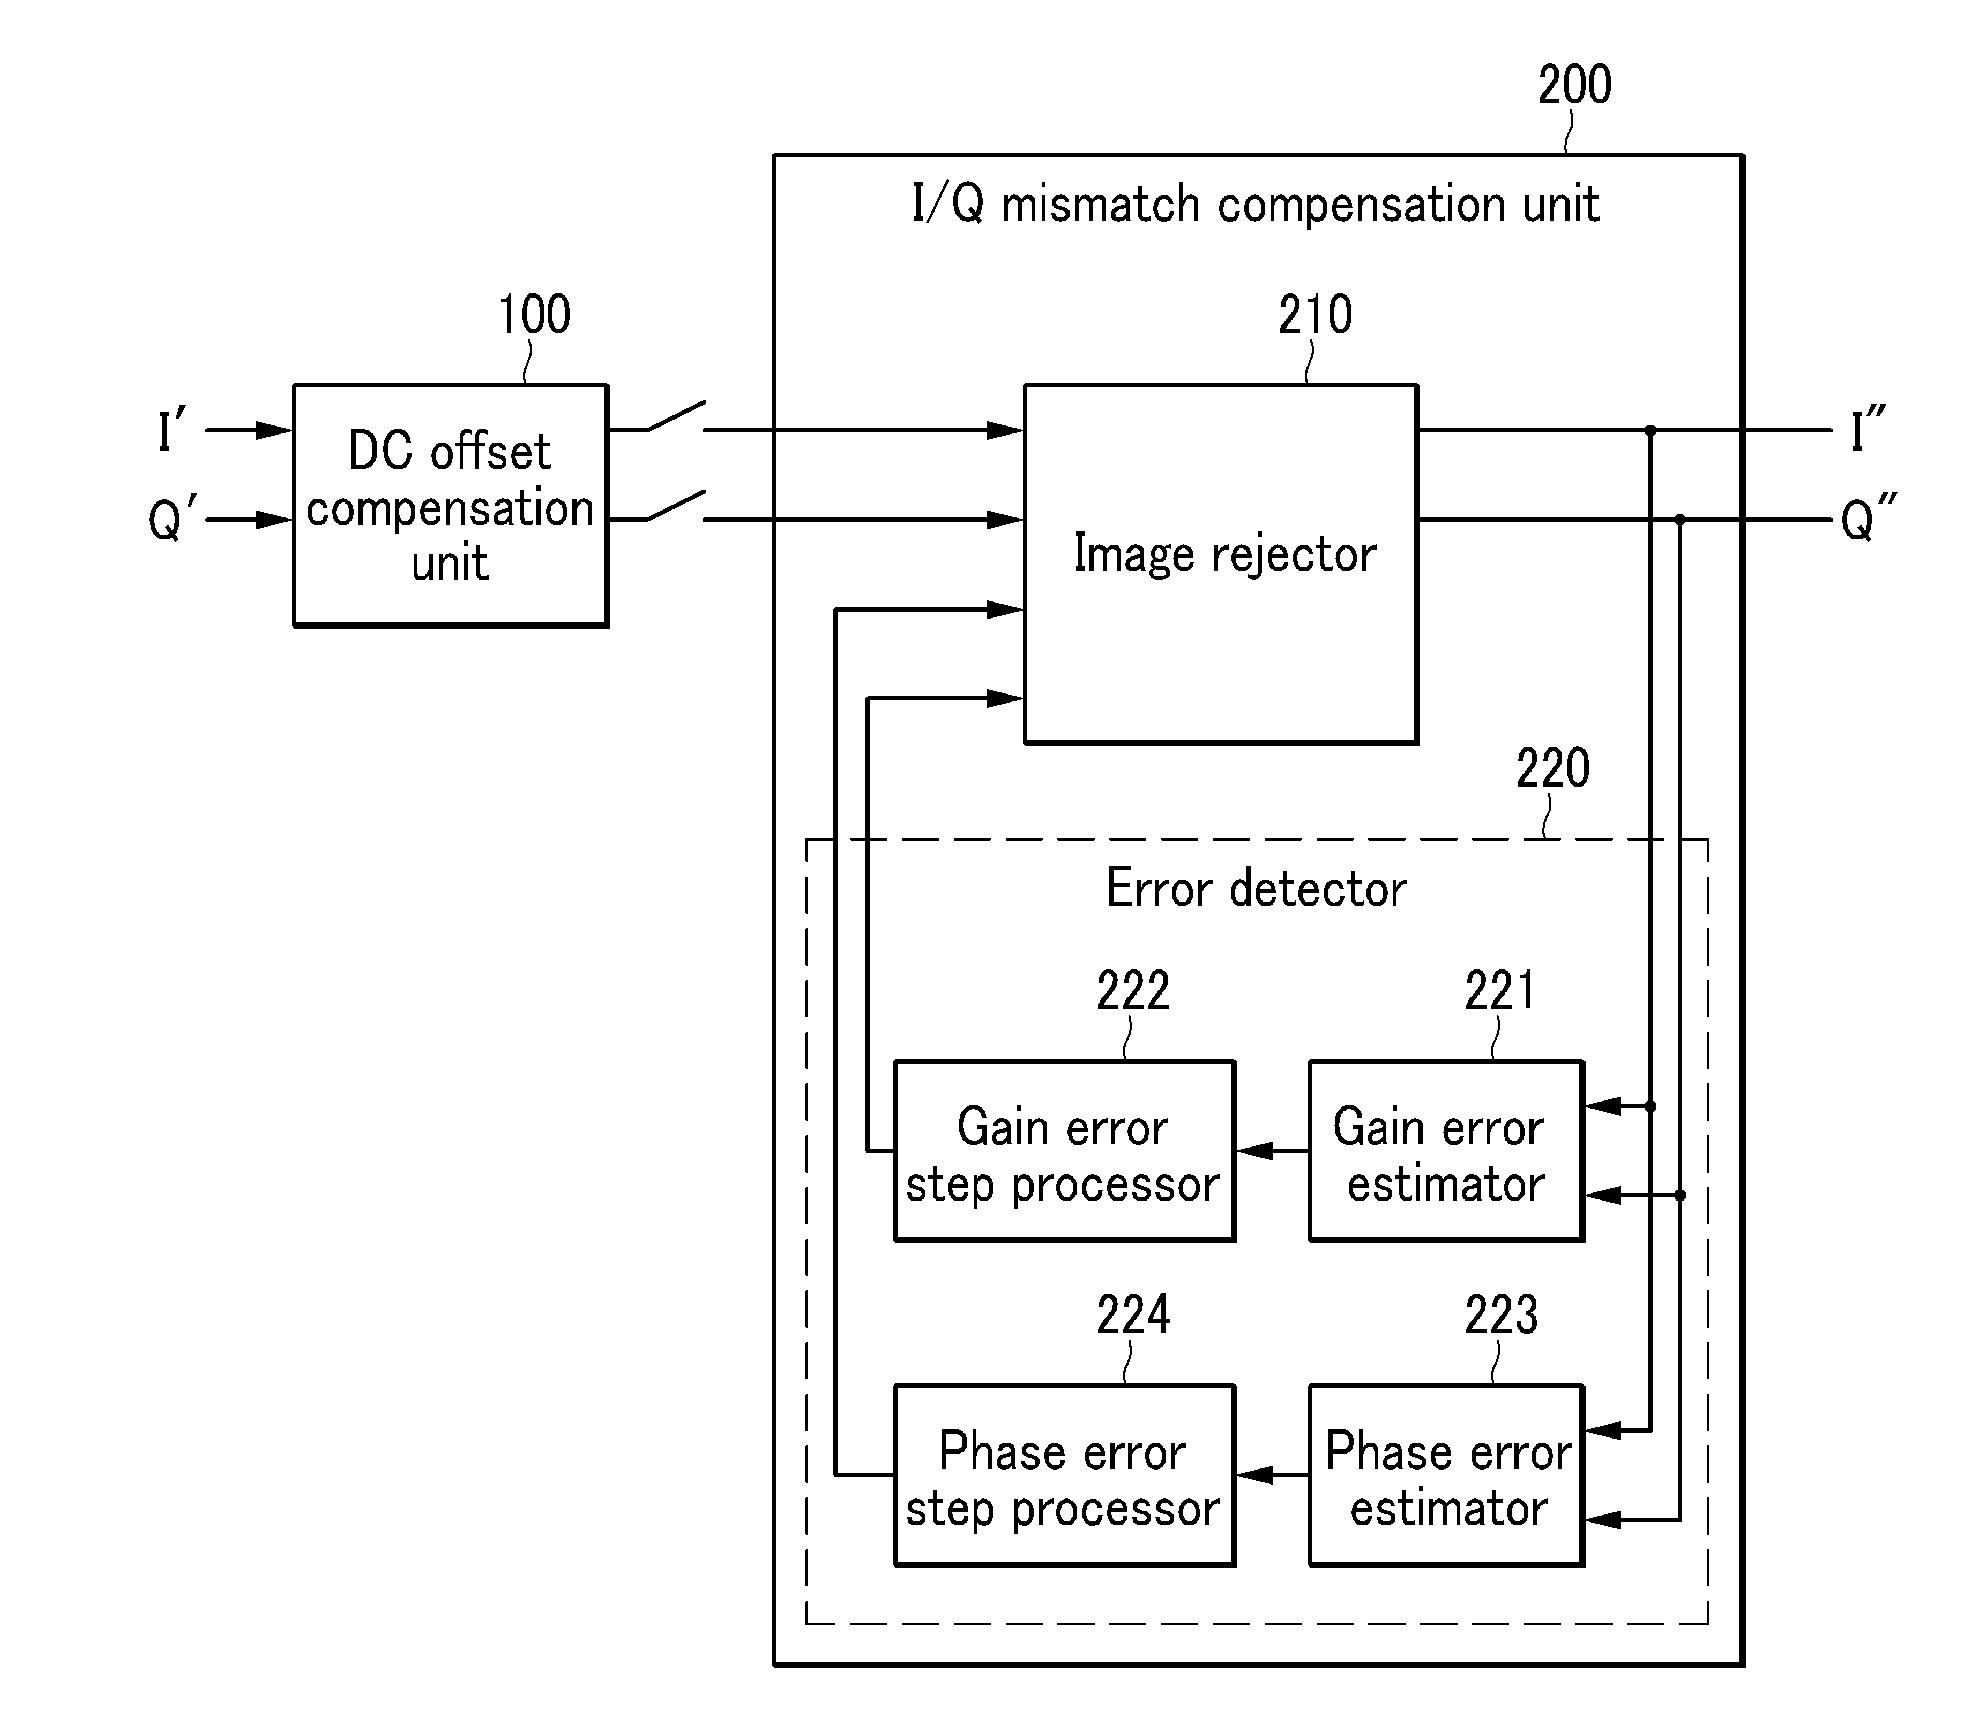 Apparatus for rejecting image in receiver